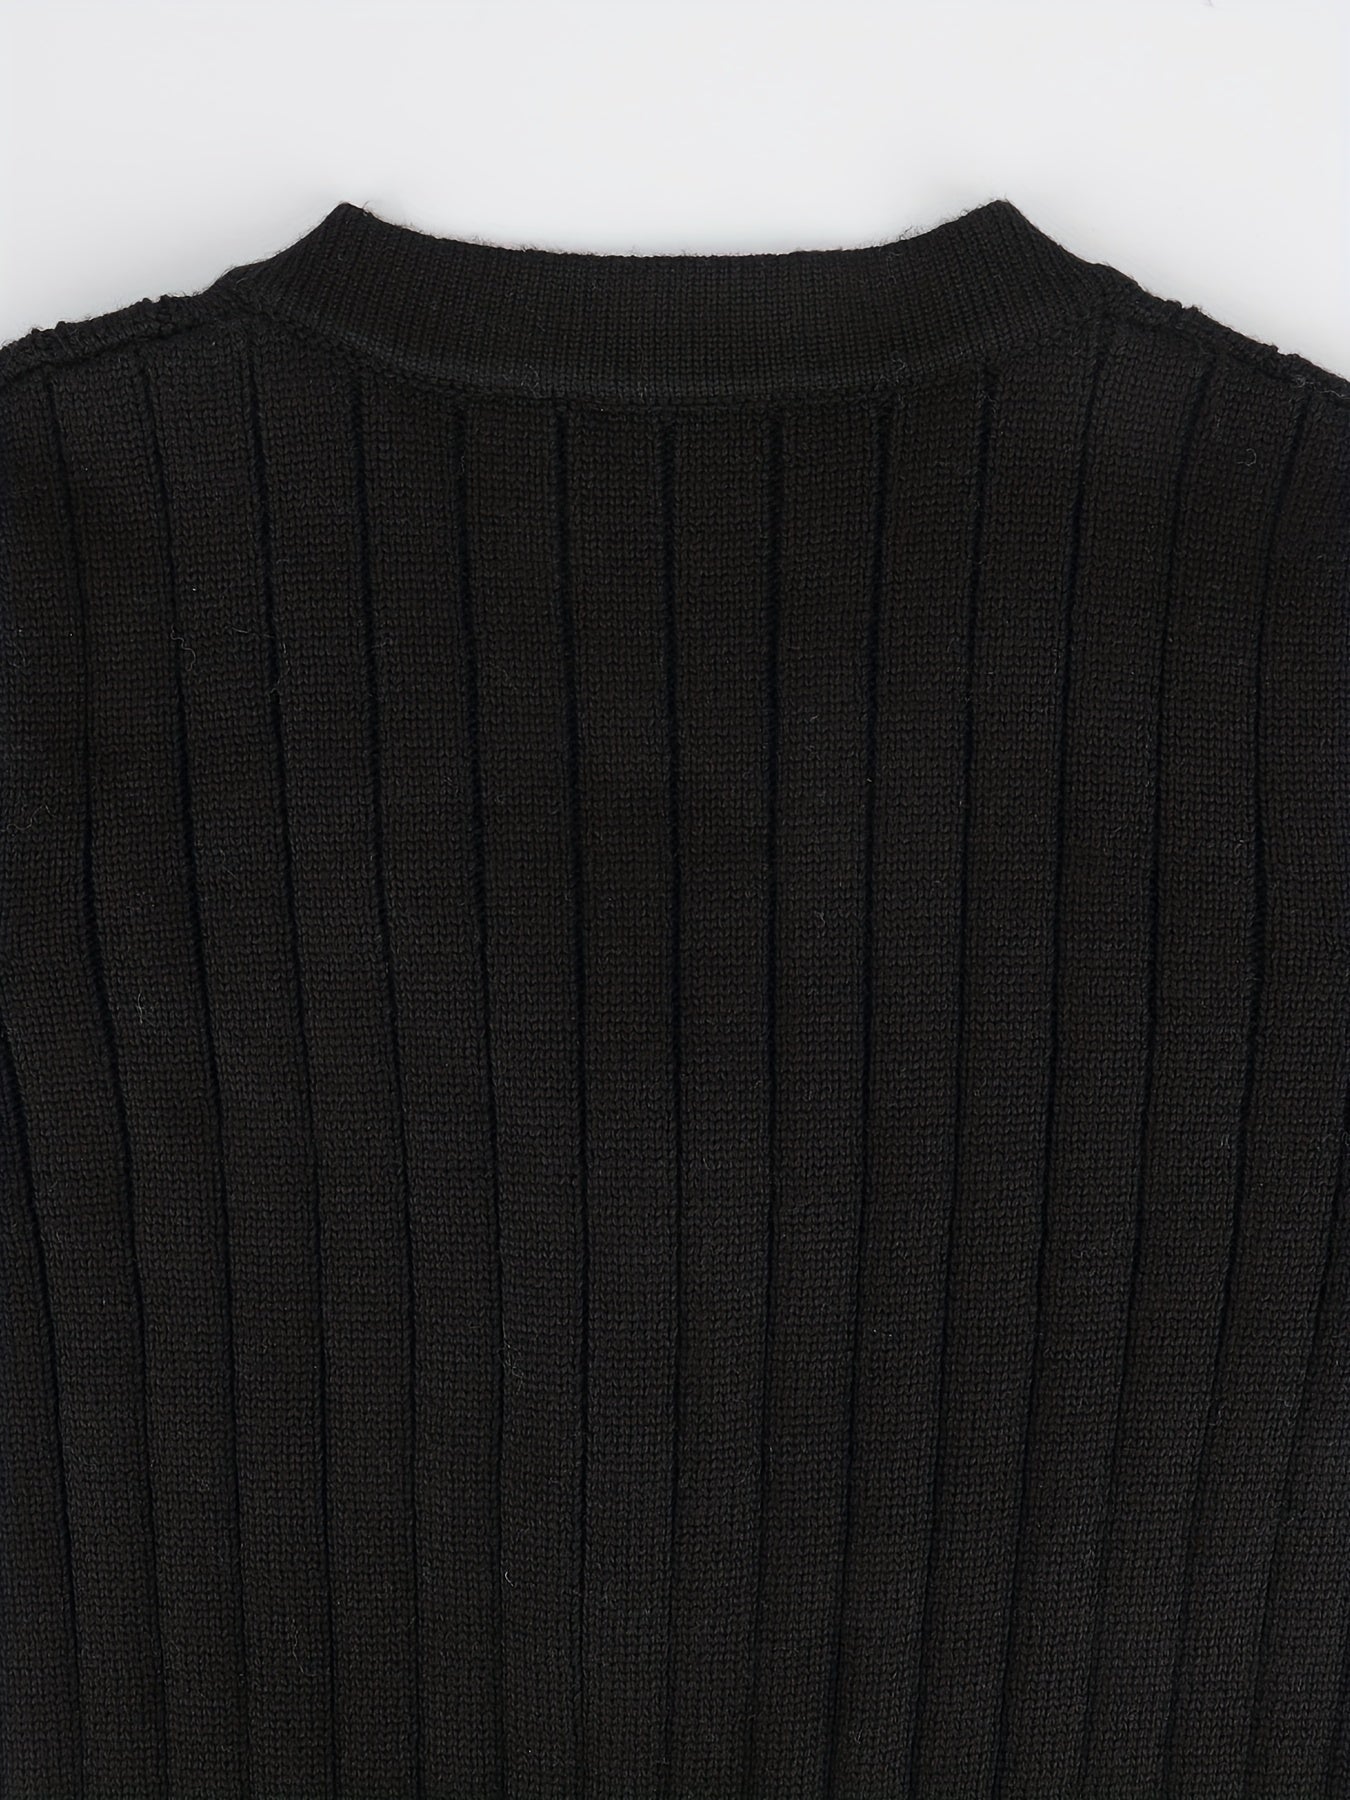 Antmvs Solid Rib Knit Sweater, Casual V Neck Button Front Sweater, Women's Clothing